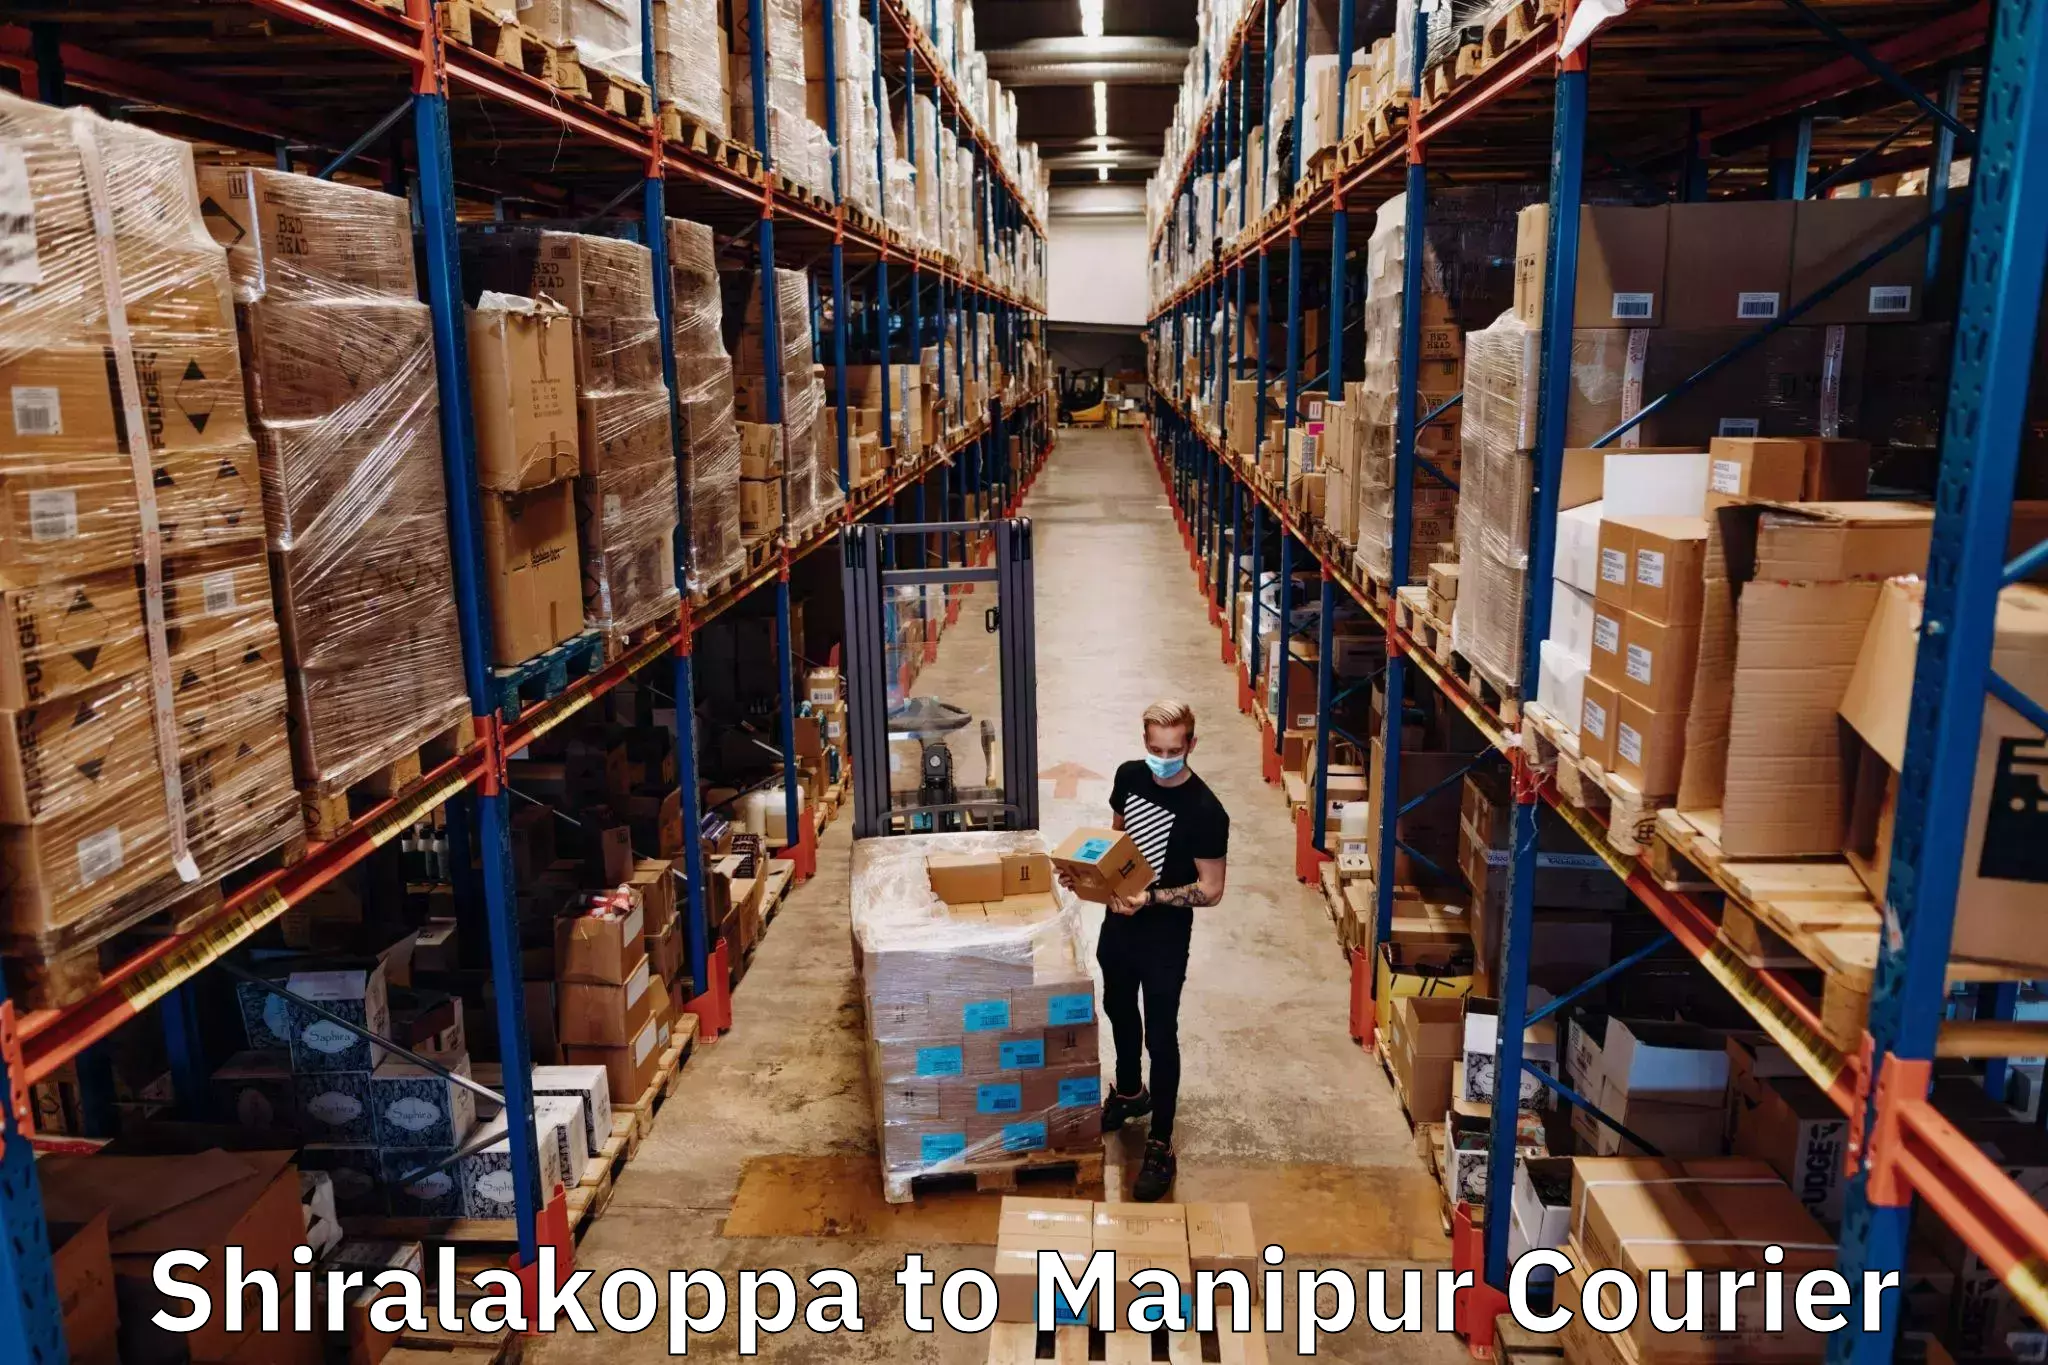 User-friendly courier app Shiralakoppa to Manipur